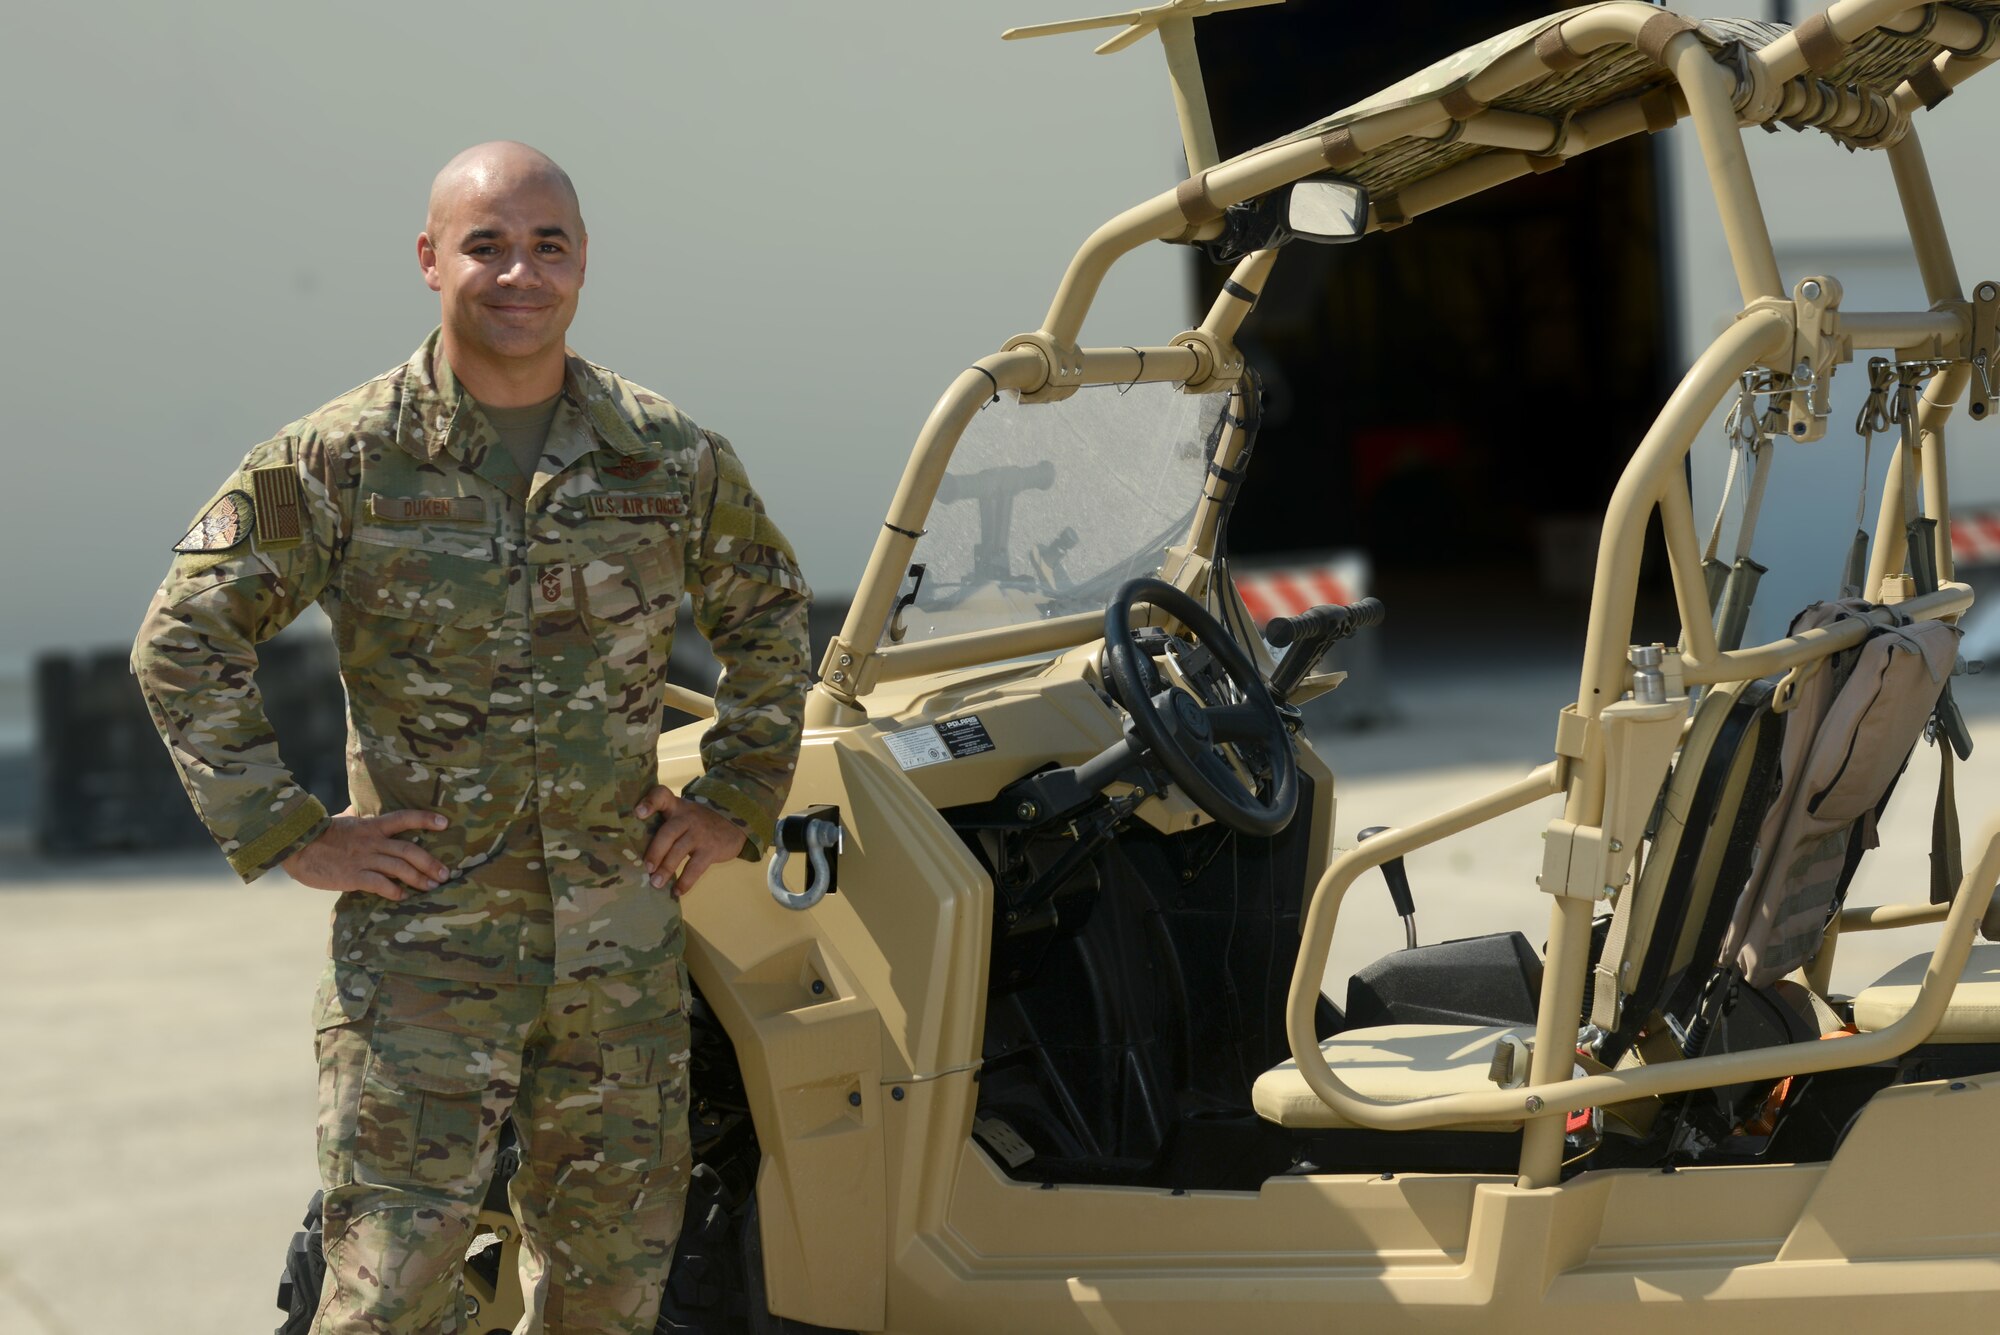 U.S. Air Force Master Sgt. Richard Duken, first sergeant of the 57th Rescue Squadron, poses for a photo next to a Military Razor vehicle at Aviano Air Base, Italy, June 25, 2019. The 57th Rescue Squadron leads, organizes, trains and equips Guardian Angel weapons system and combat support teams to conduct day and night personnel recovery operations in combat. (U.S. Air Force photo by Airman 1st Class Ericka A. Woolever).